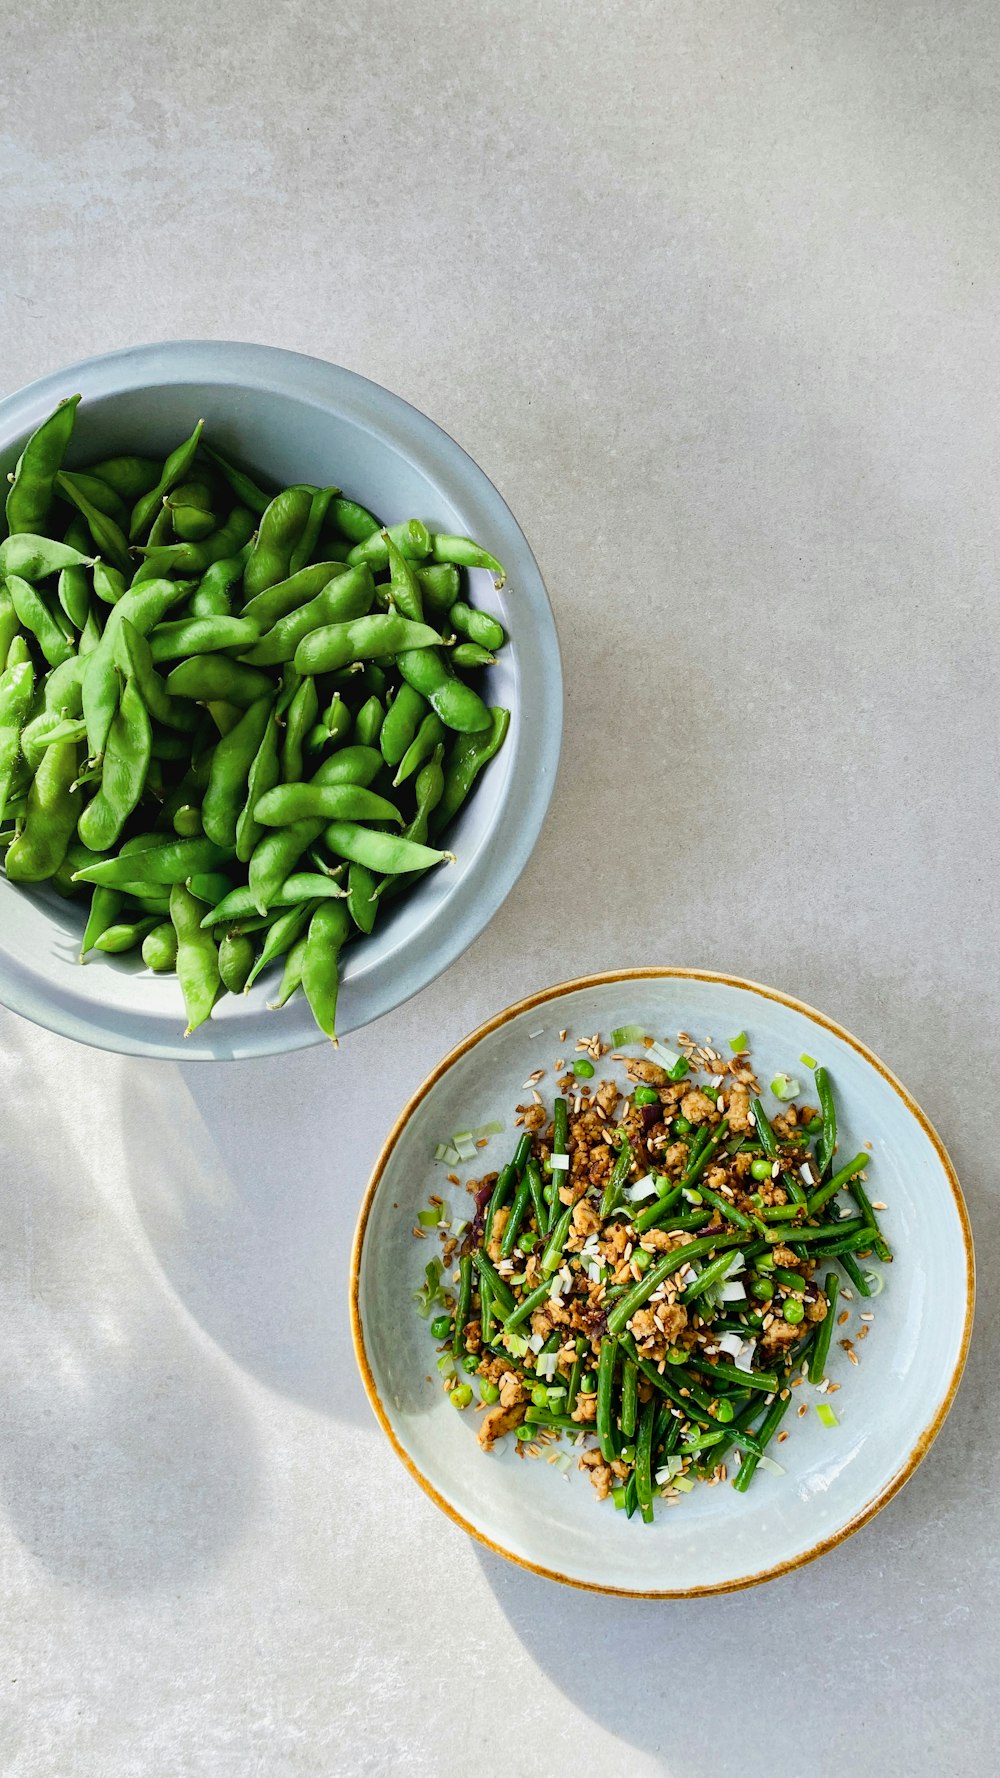 a bowl of green beans next to a bowl of green beans